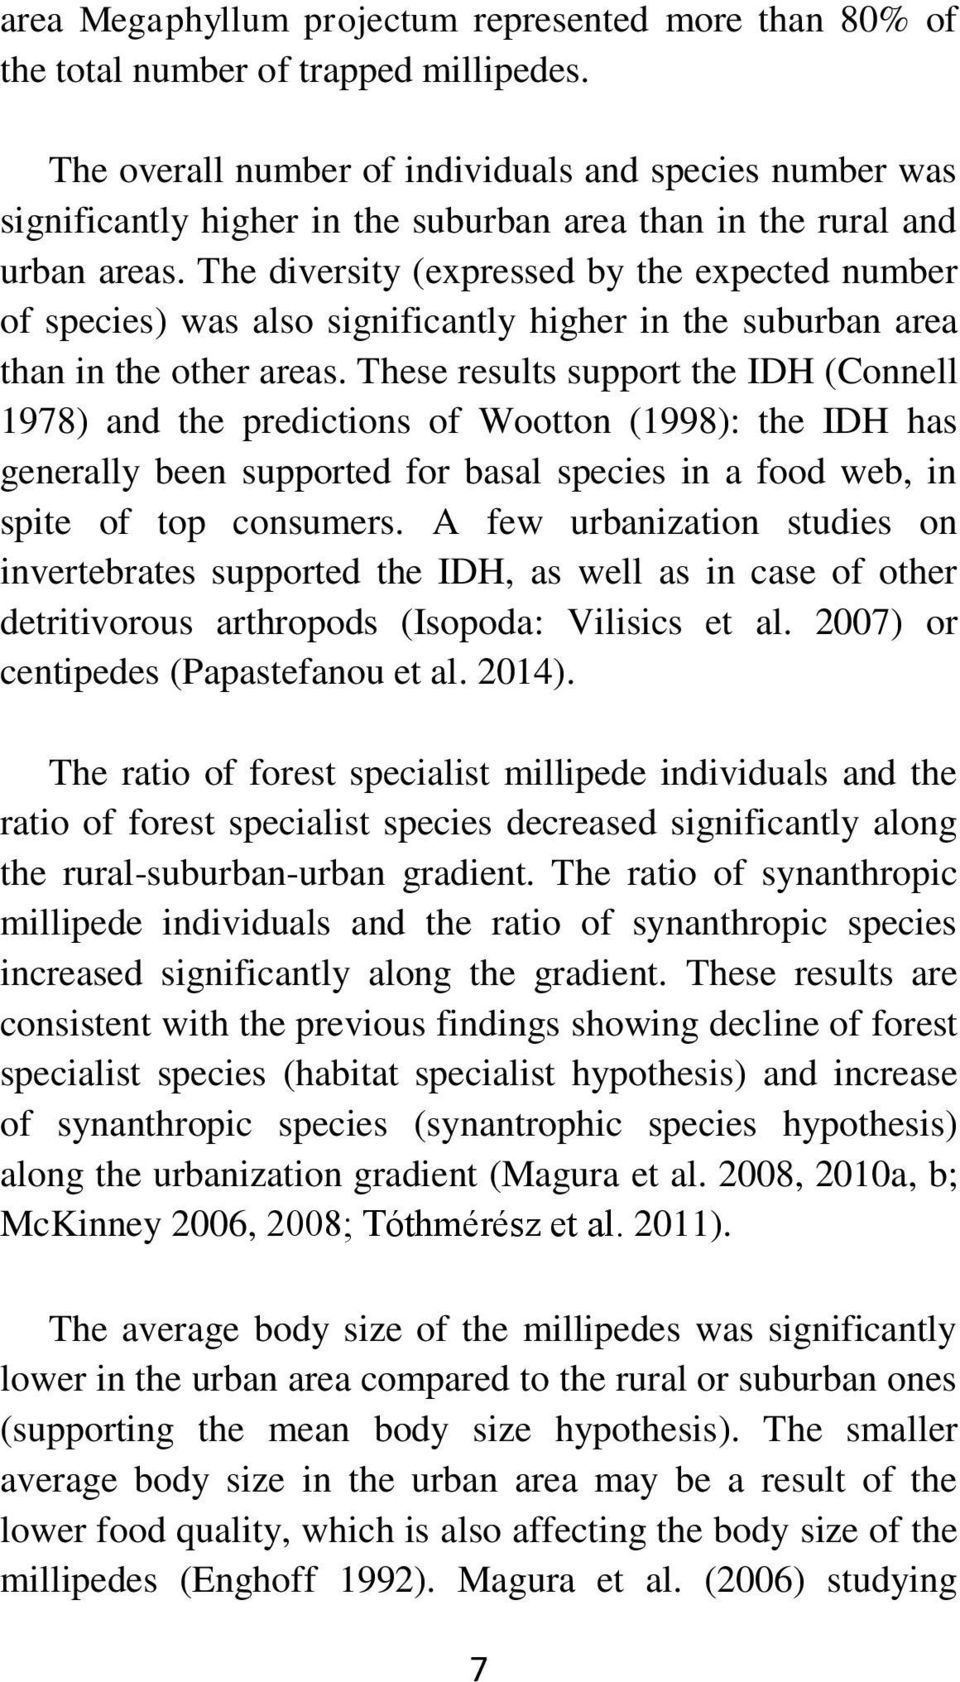 The diversity (expressed by the expected number of species) was also significantly higher in the suburban area than in the other areas.